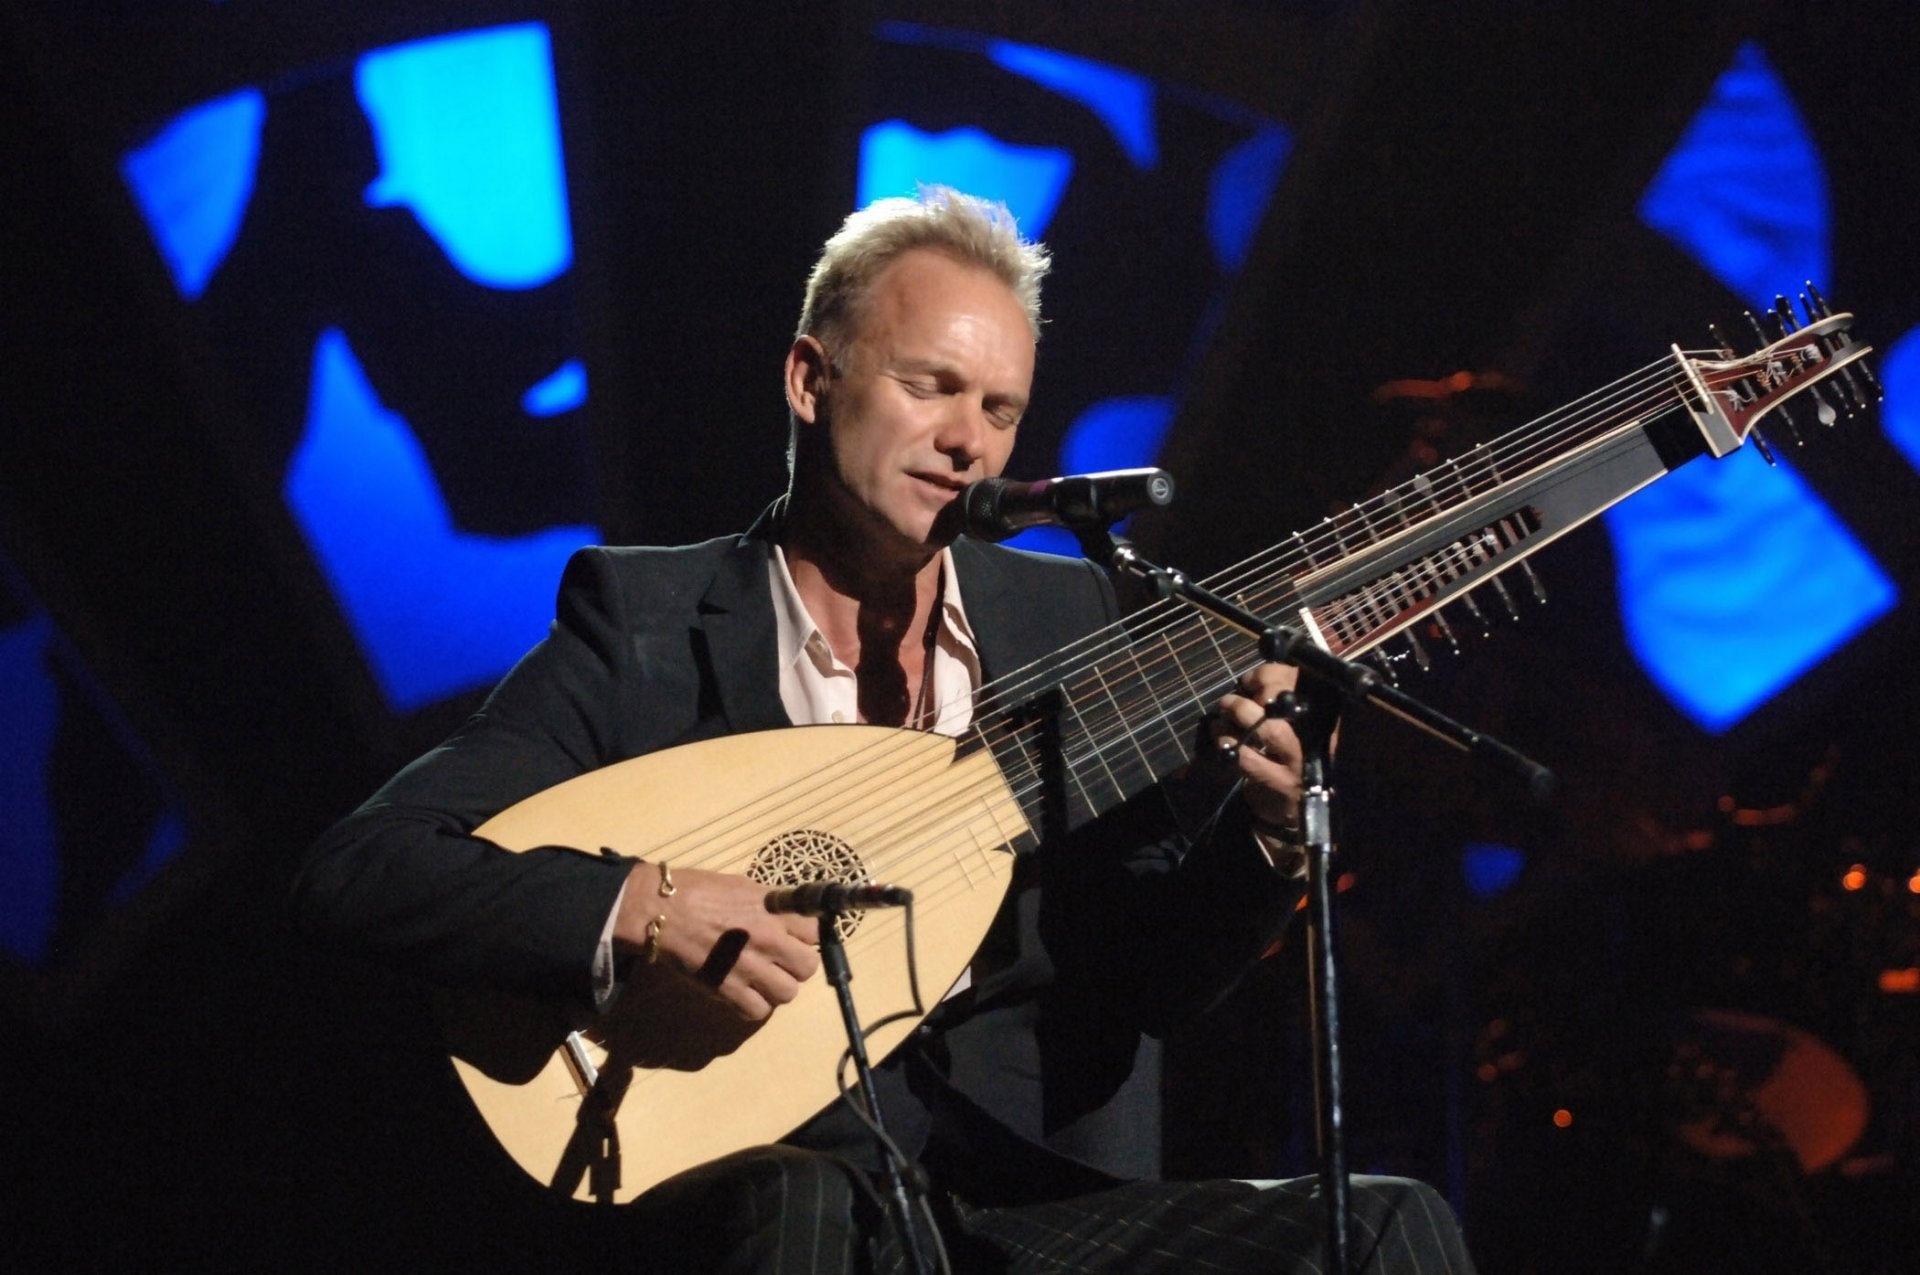 Sting, Musician wallpapers, High-quality images, 1920x1280 HD Desktop